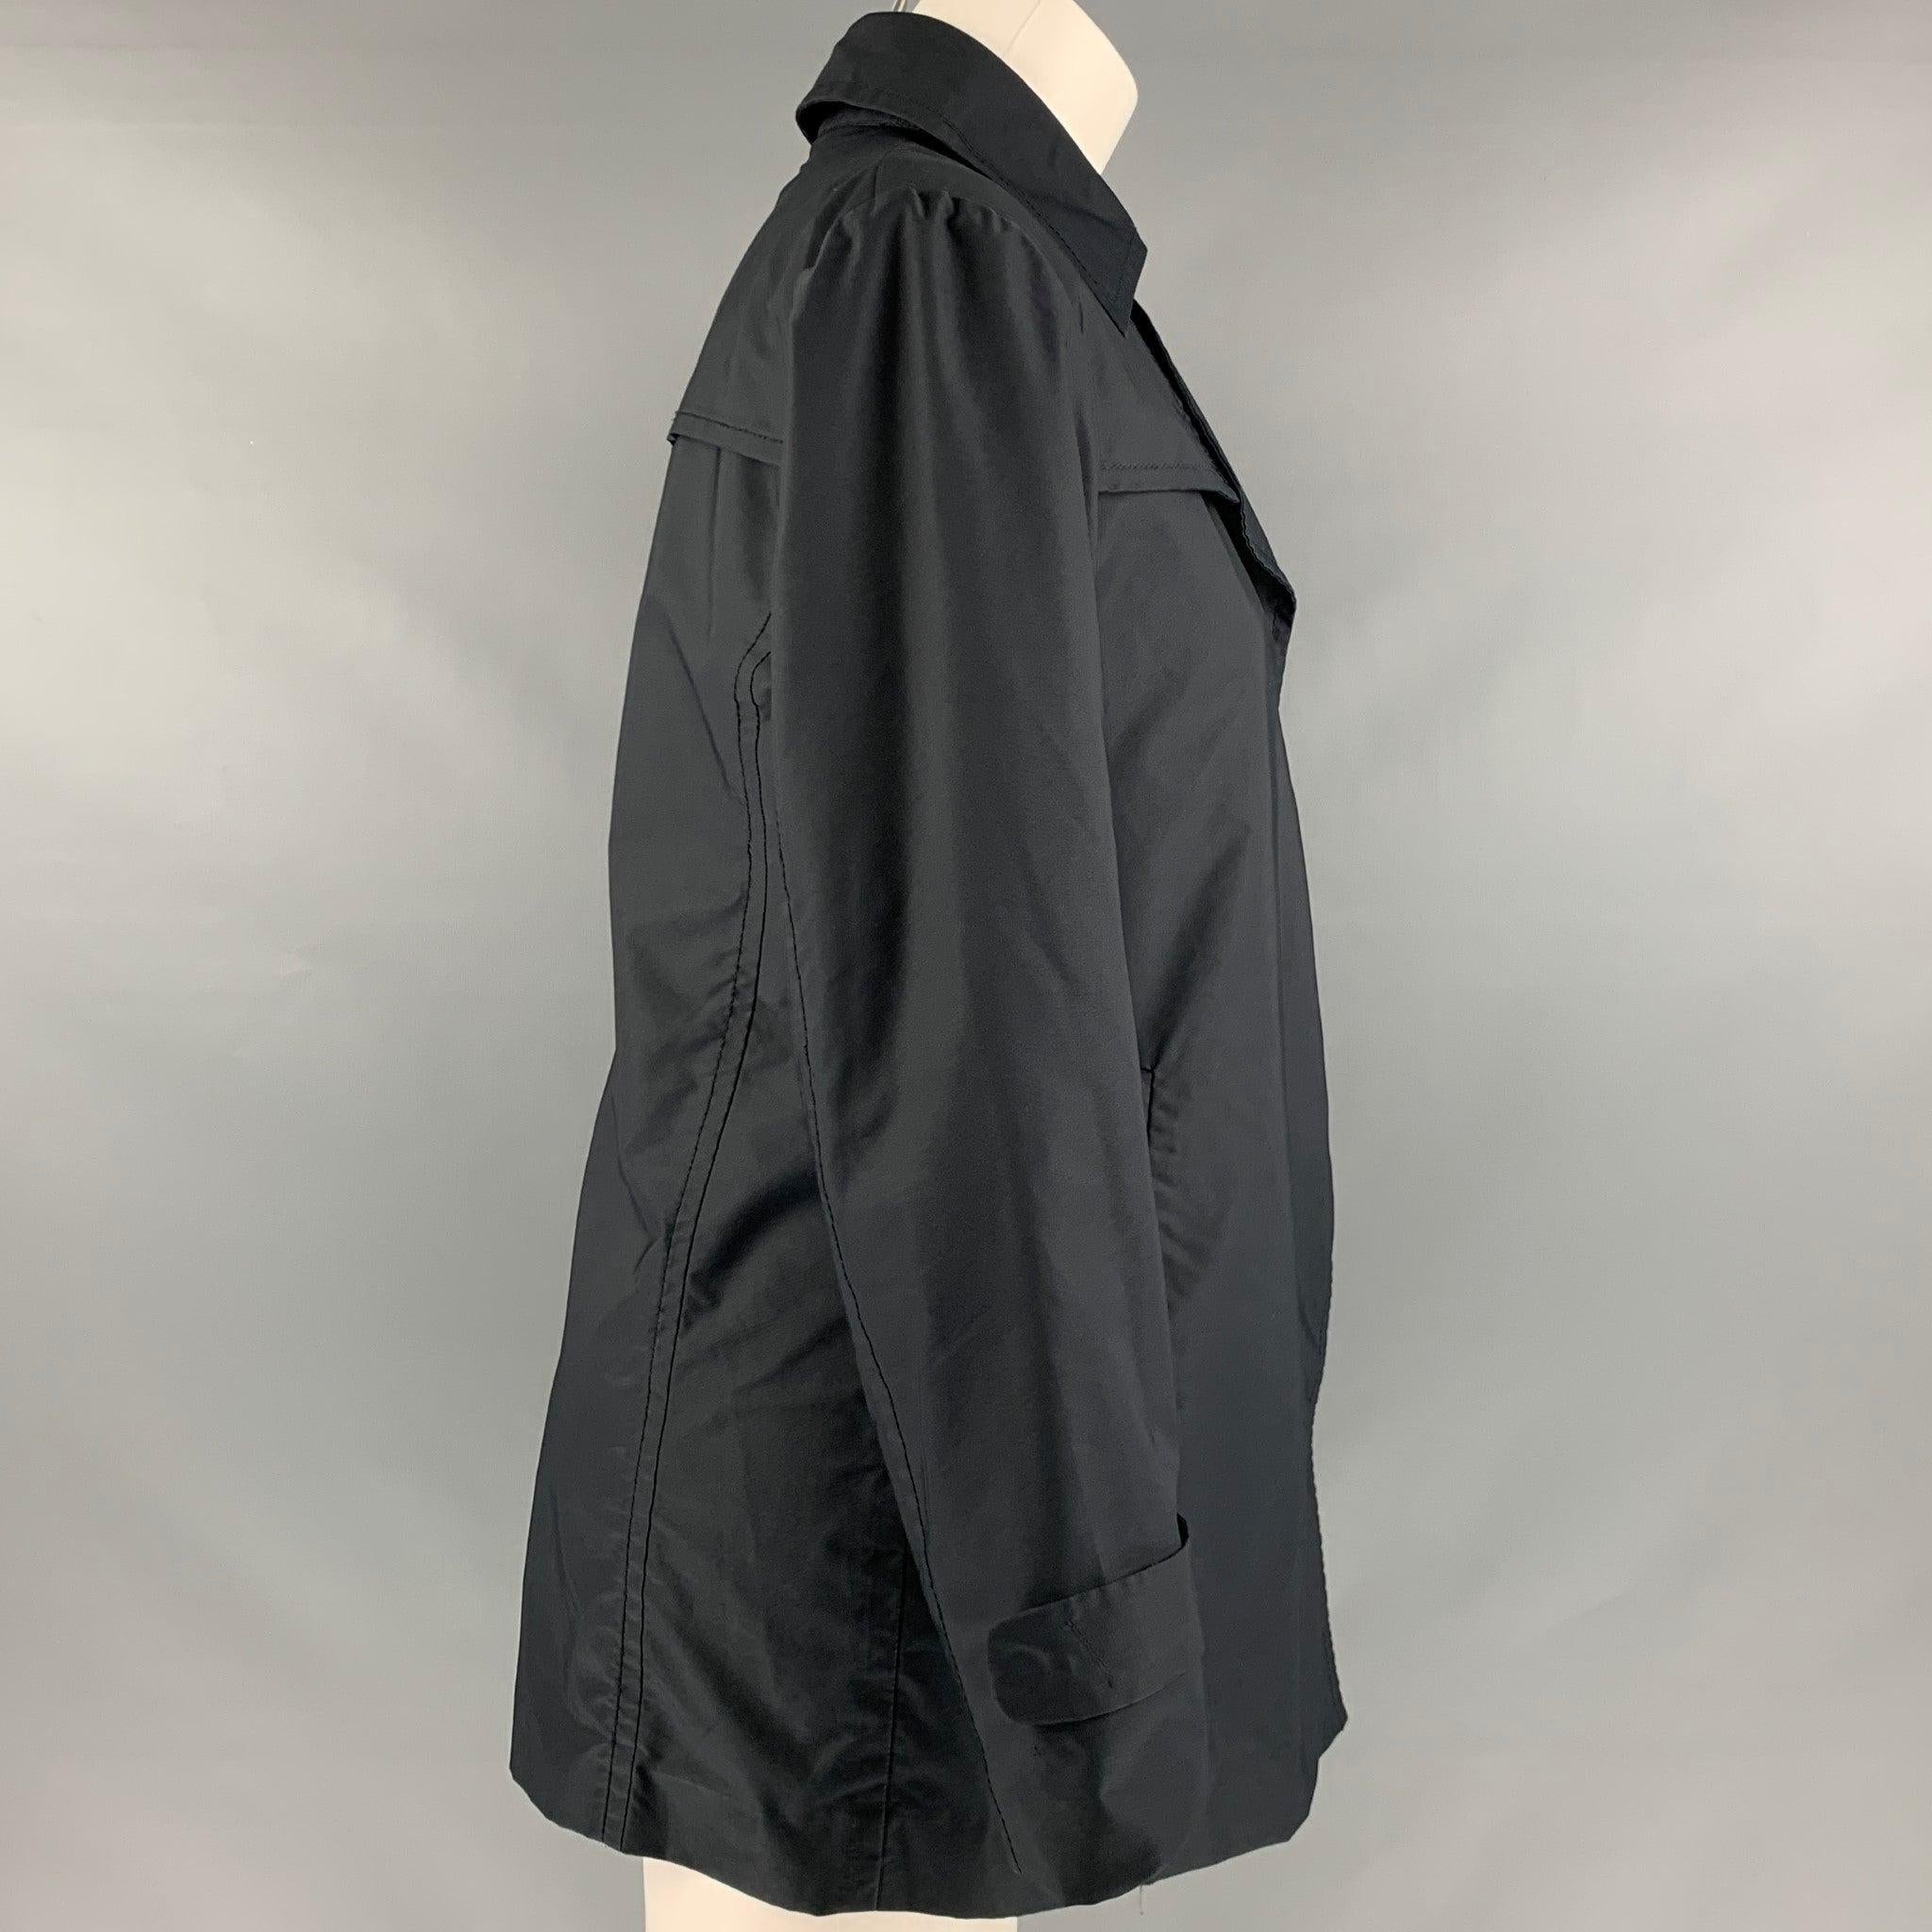 CoSTUME NATIONAL jacket in black polyester blend featuring a single breasted style and a hidden button closure. Made in Italy.Excellent Pre-Owned Condition. 

Marked:   IT 42 

Measurements: 
 
Shoulder: 16 inches Bust: 35 inches Sleeve: 23 inches